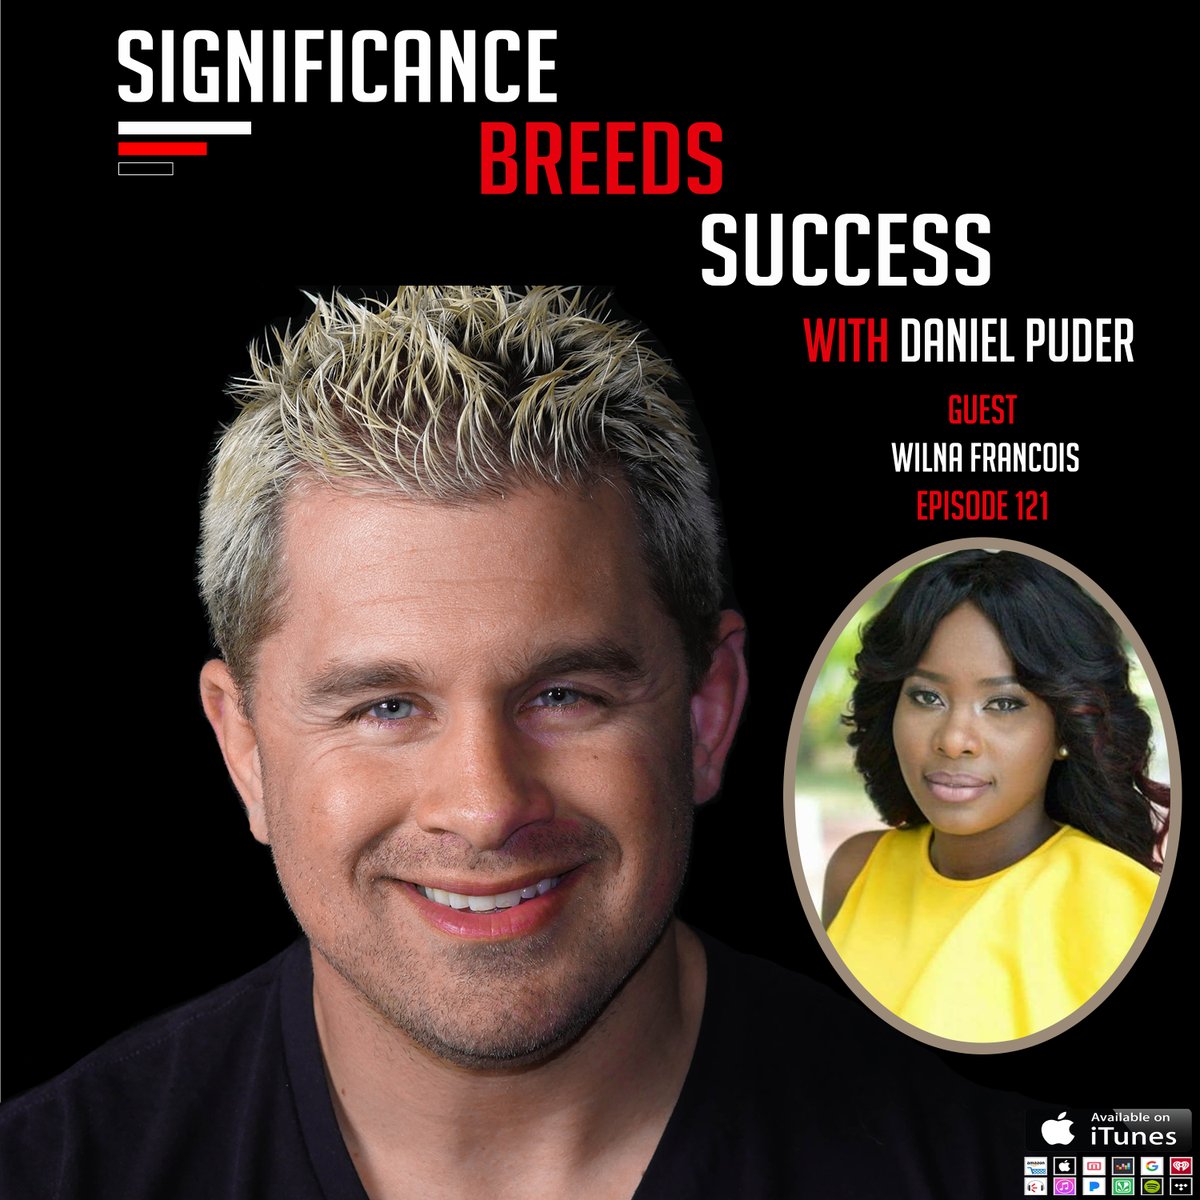 New Significance Breeds Success Episode: The importance of Therapy & Knowing Yourself w. @Danielpuder & Wilna Francois gopod.me/1402771331 | itunes.apple.com/us/podcast/sig… | wavve.link/SBSaction/epis…